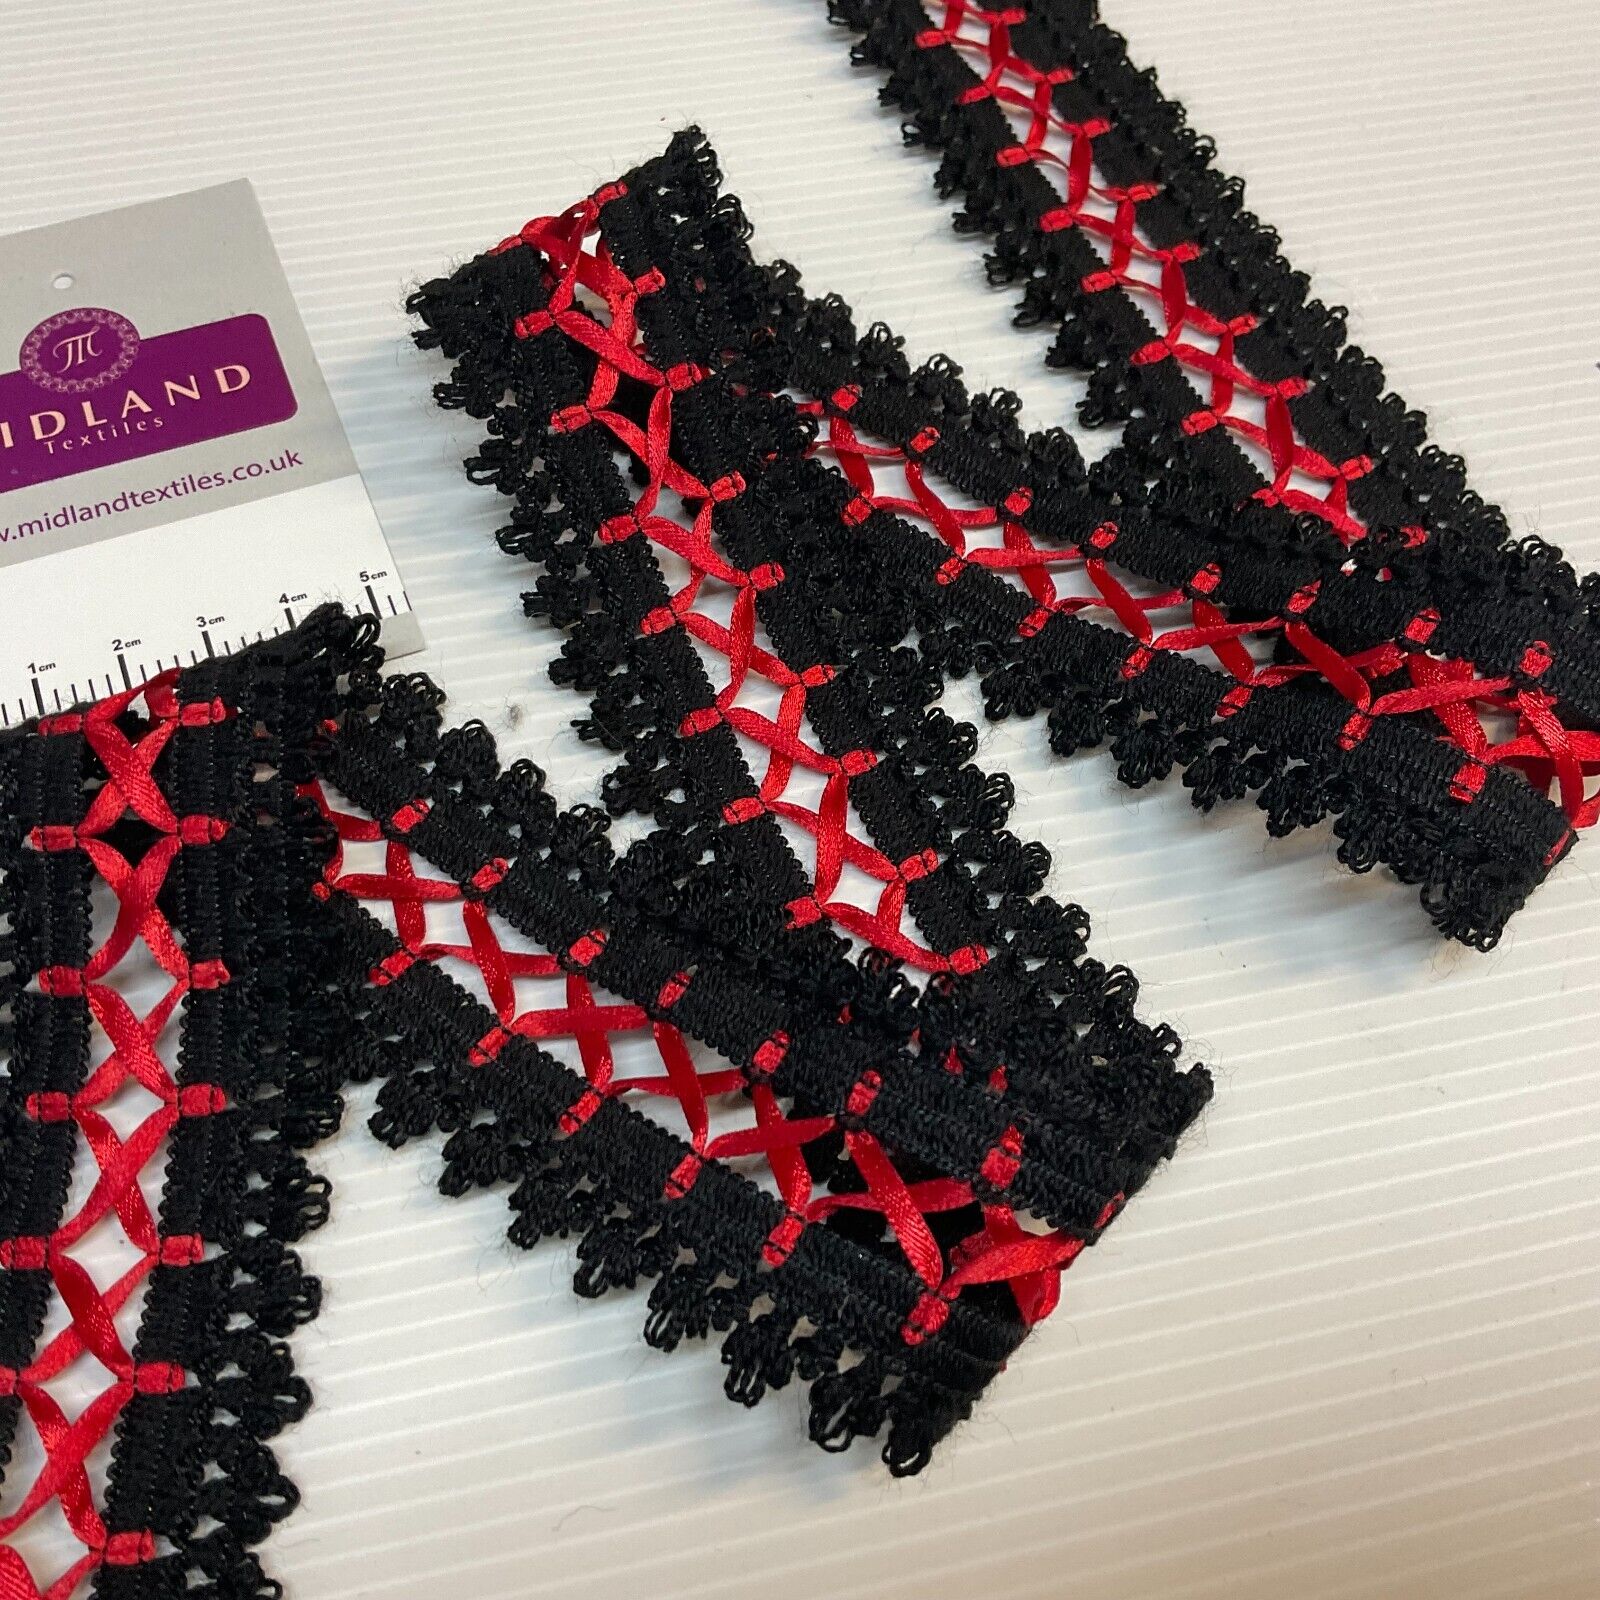 35mm wide Ribbon Lace trimming edging border M1720